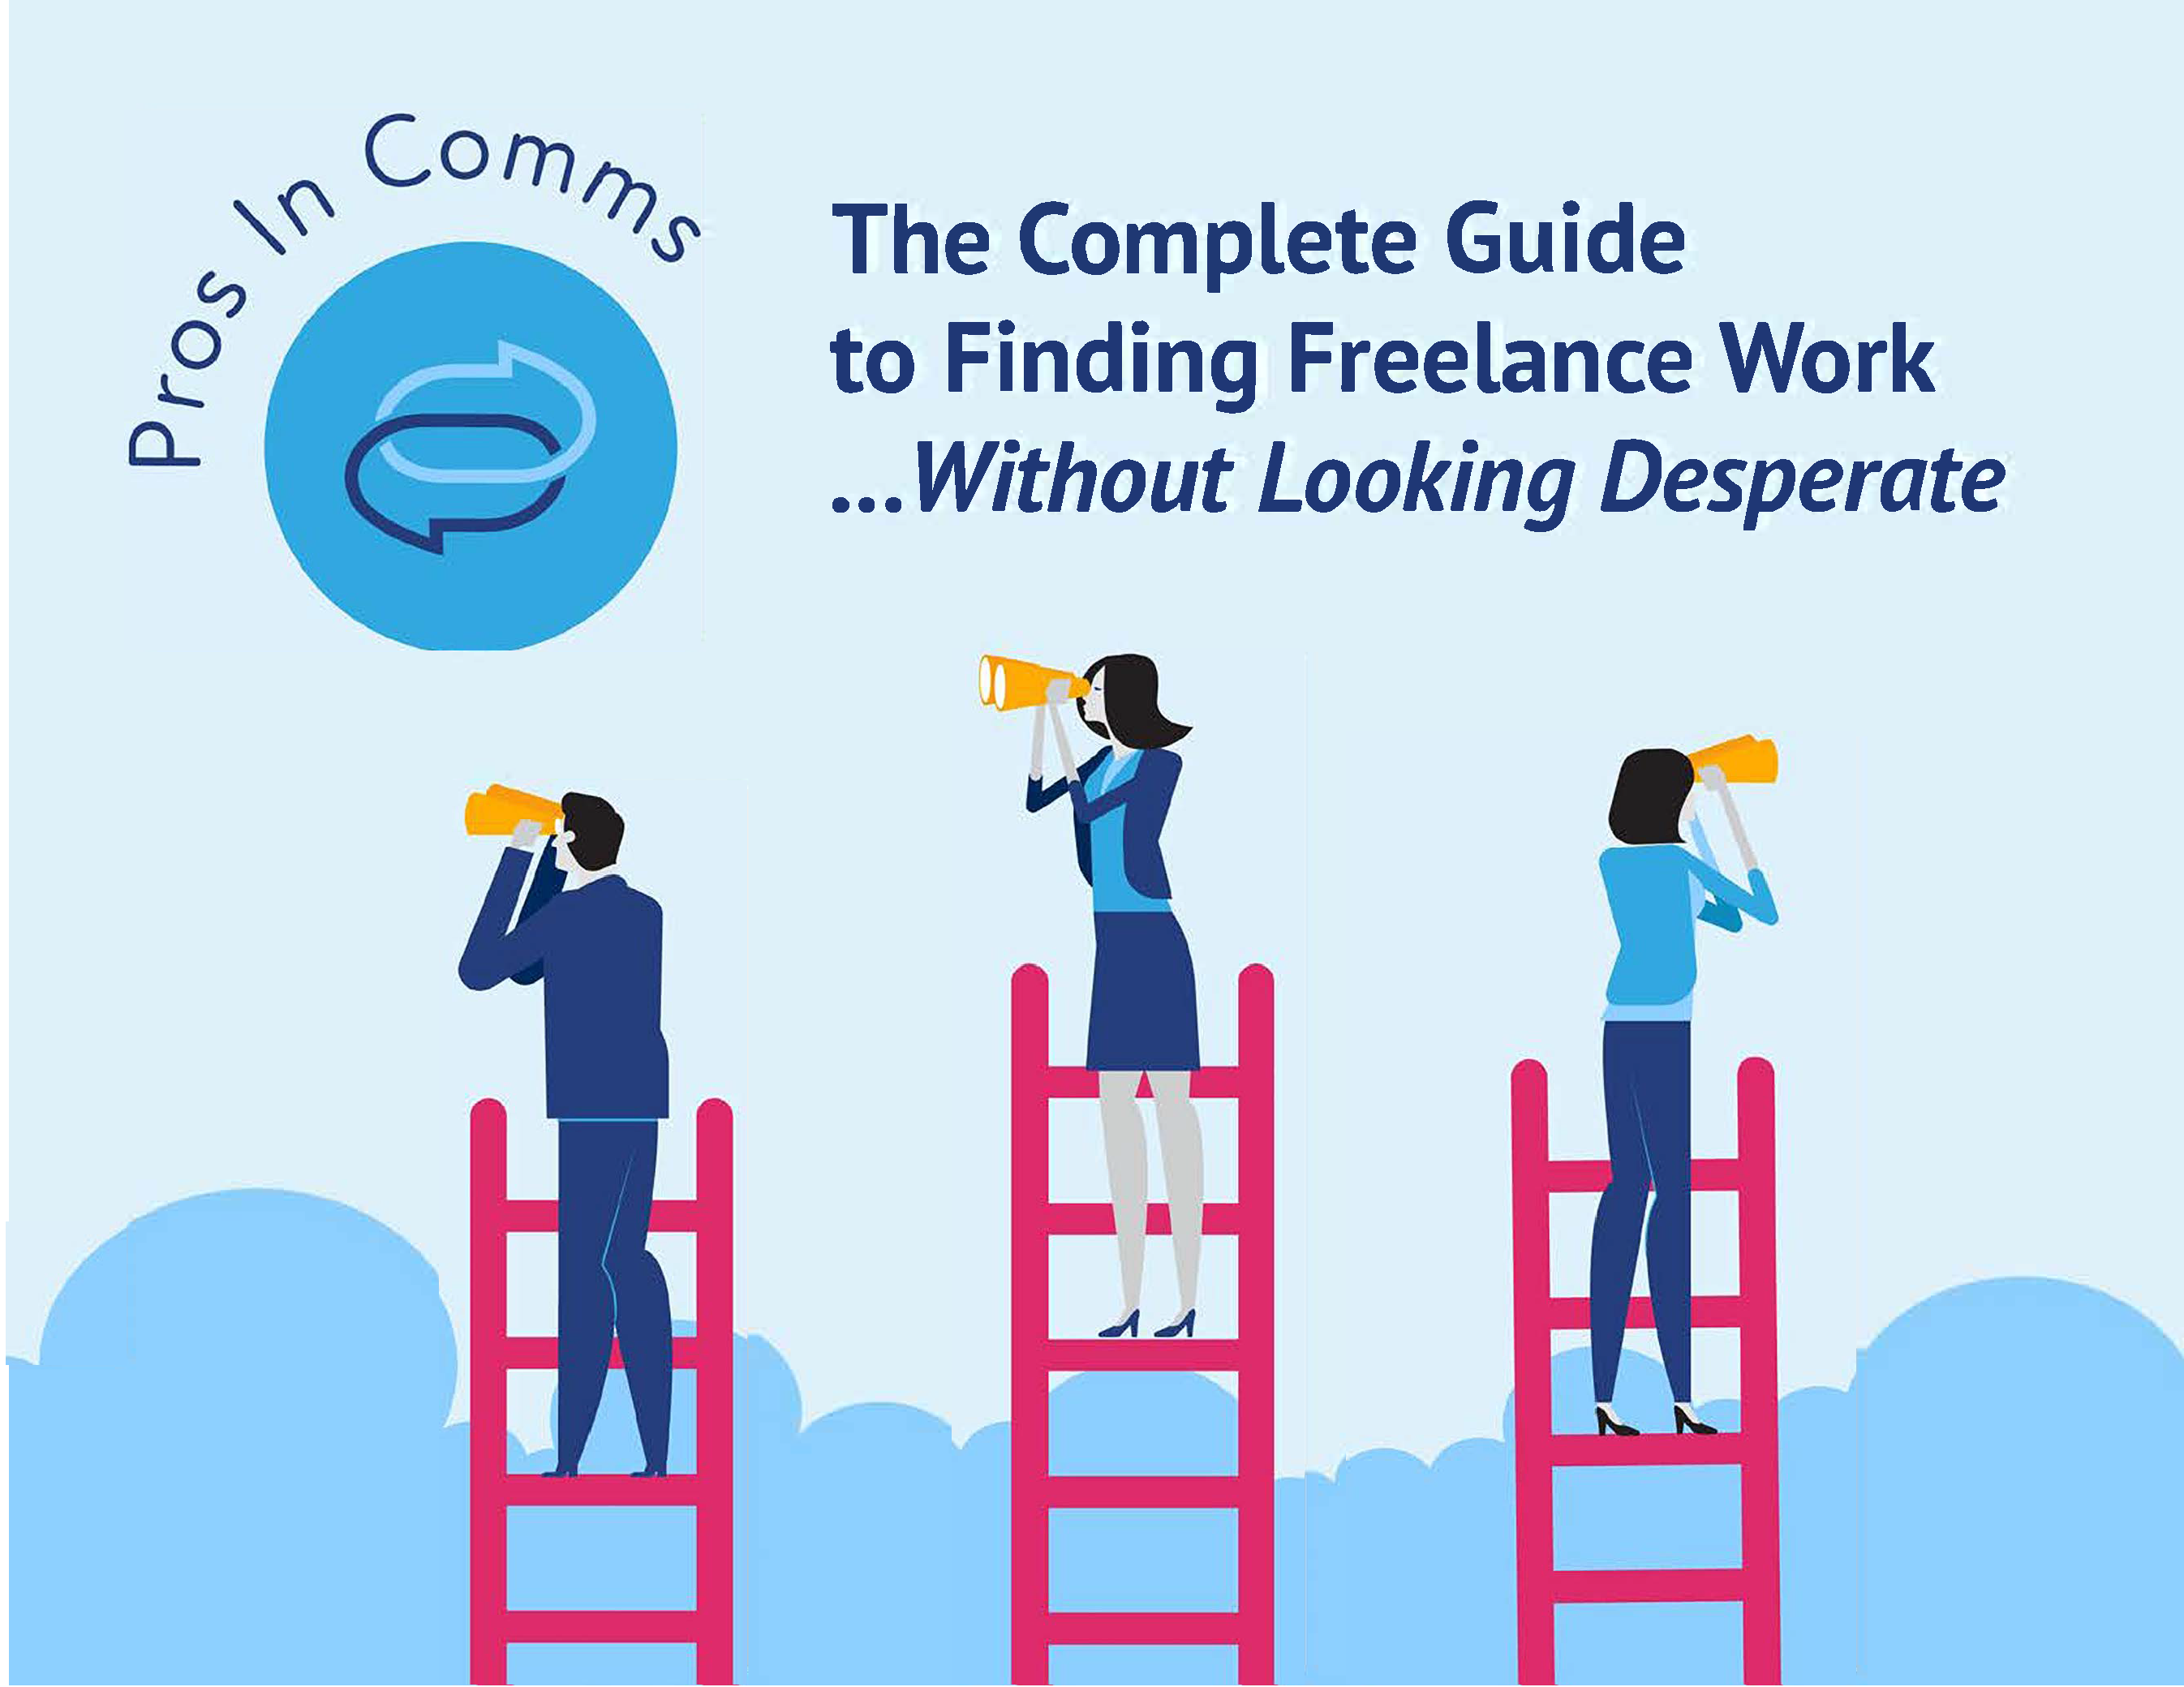 The-complete-guide-to-finding-freelance-work-without-looking-desperate